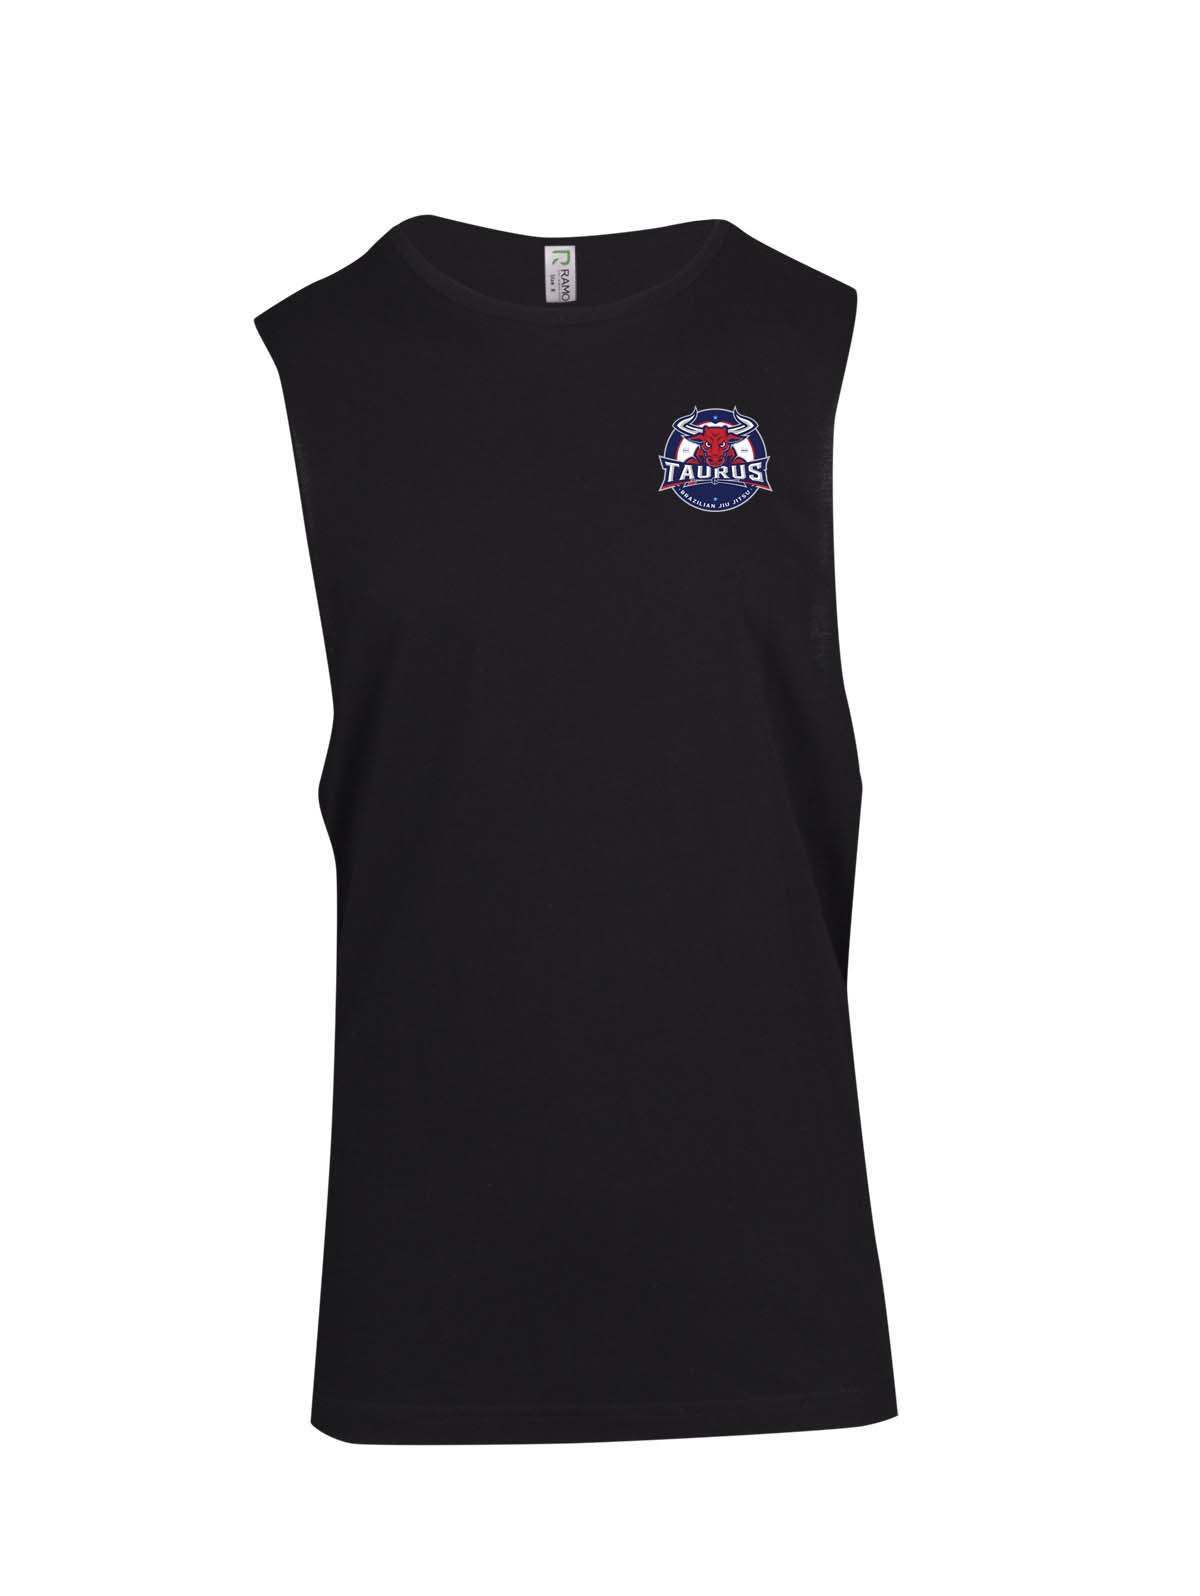 Taurus Double sided Logo Muscle T - Ladies